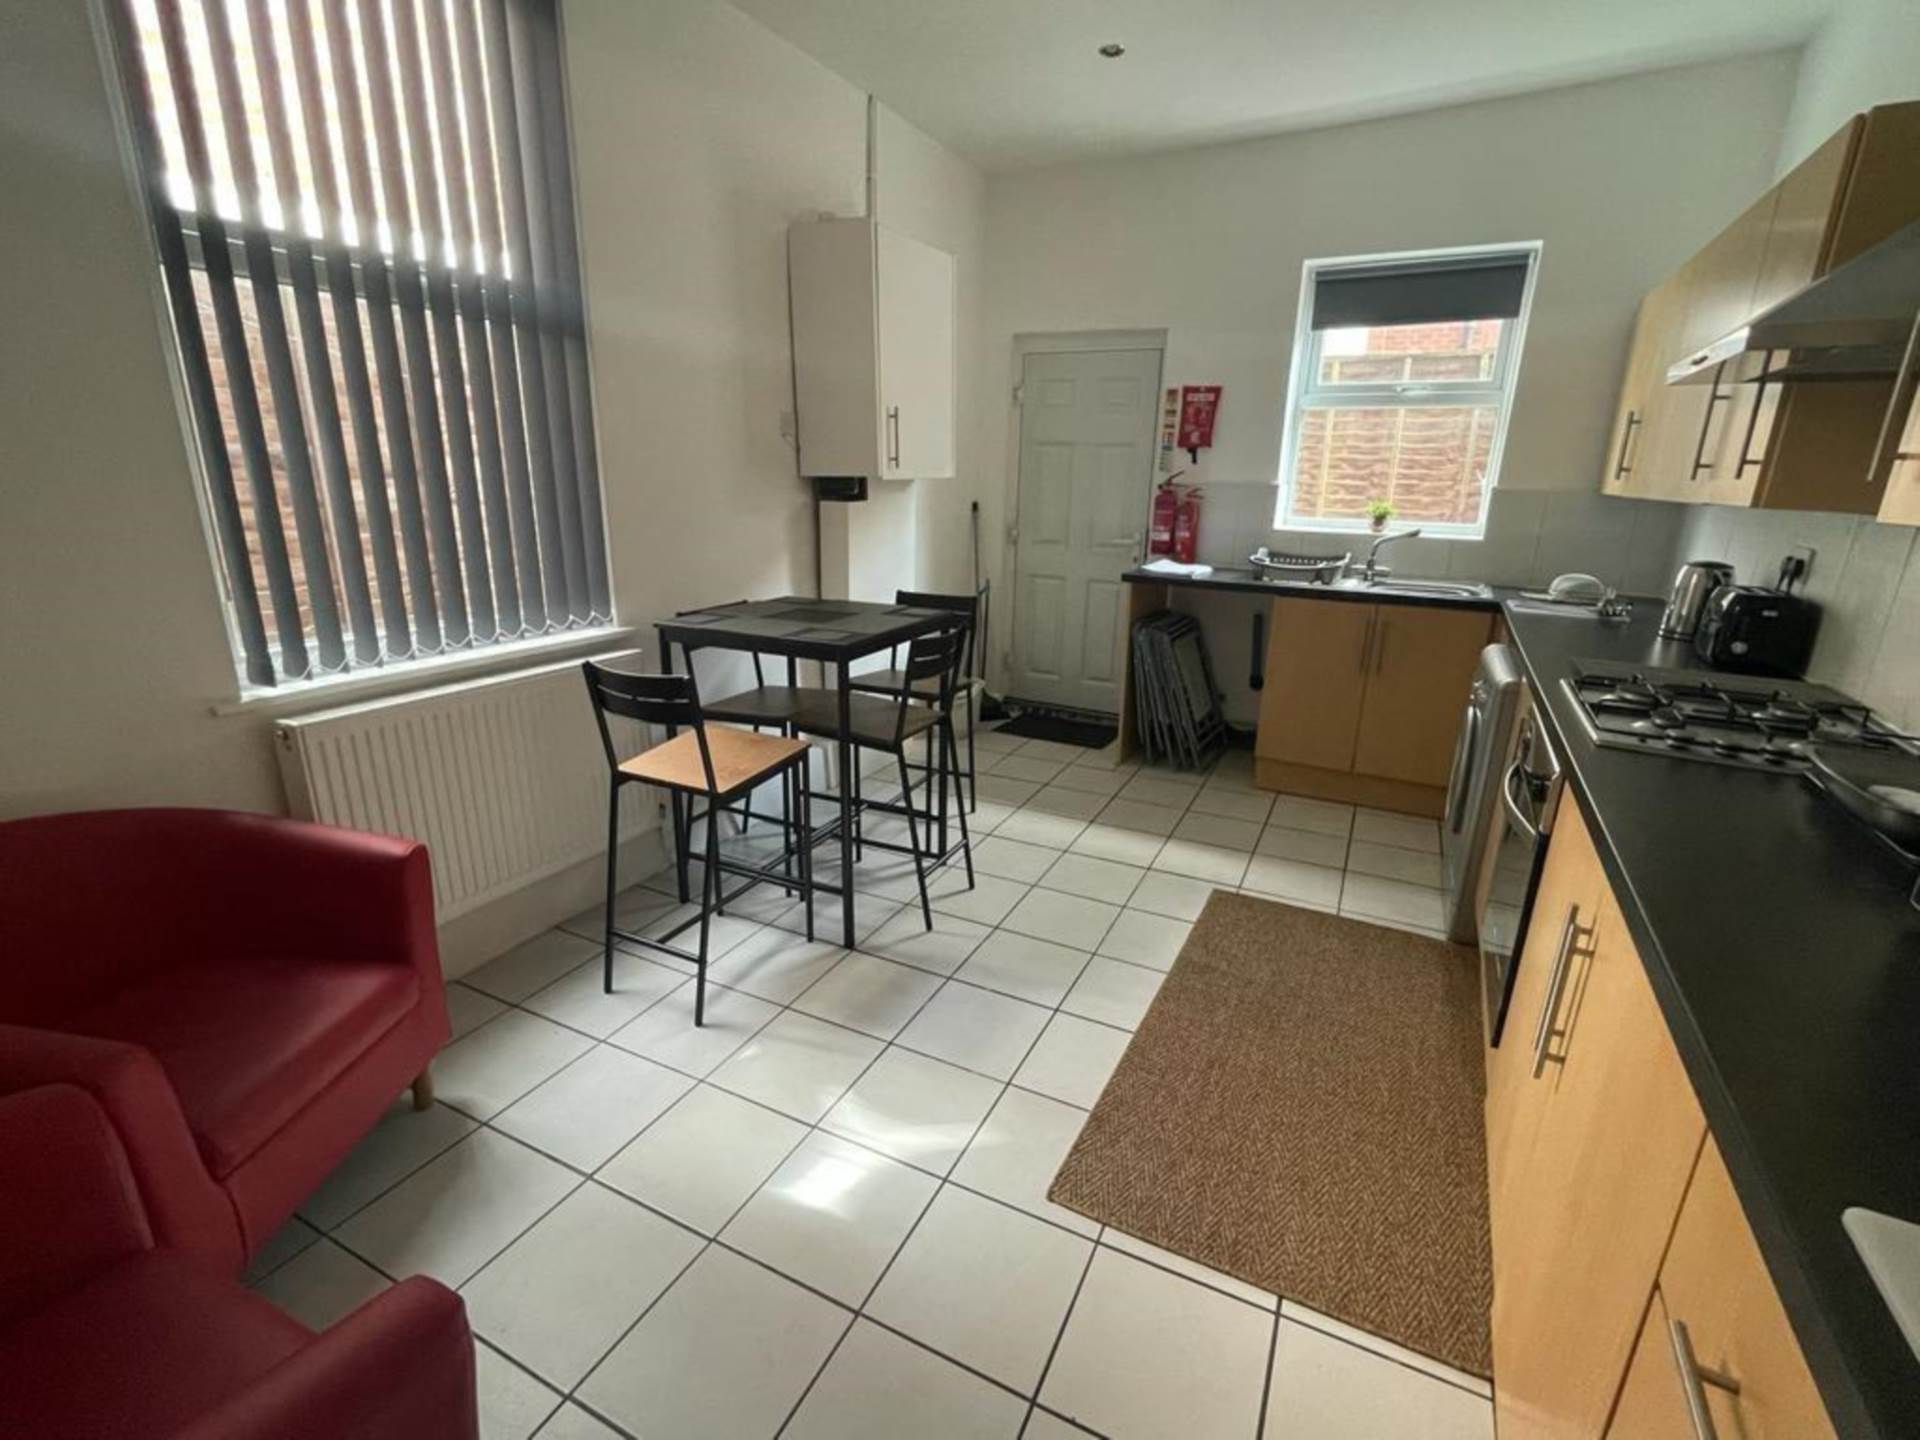 Thornycroft Road, Wavertree - 2 ROOMS AVAILABLE - STUDENTS/PROFESSIONALS, Image 4